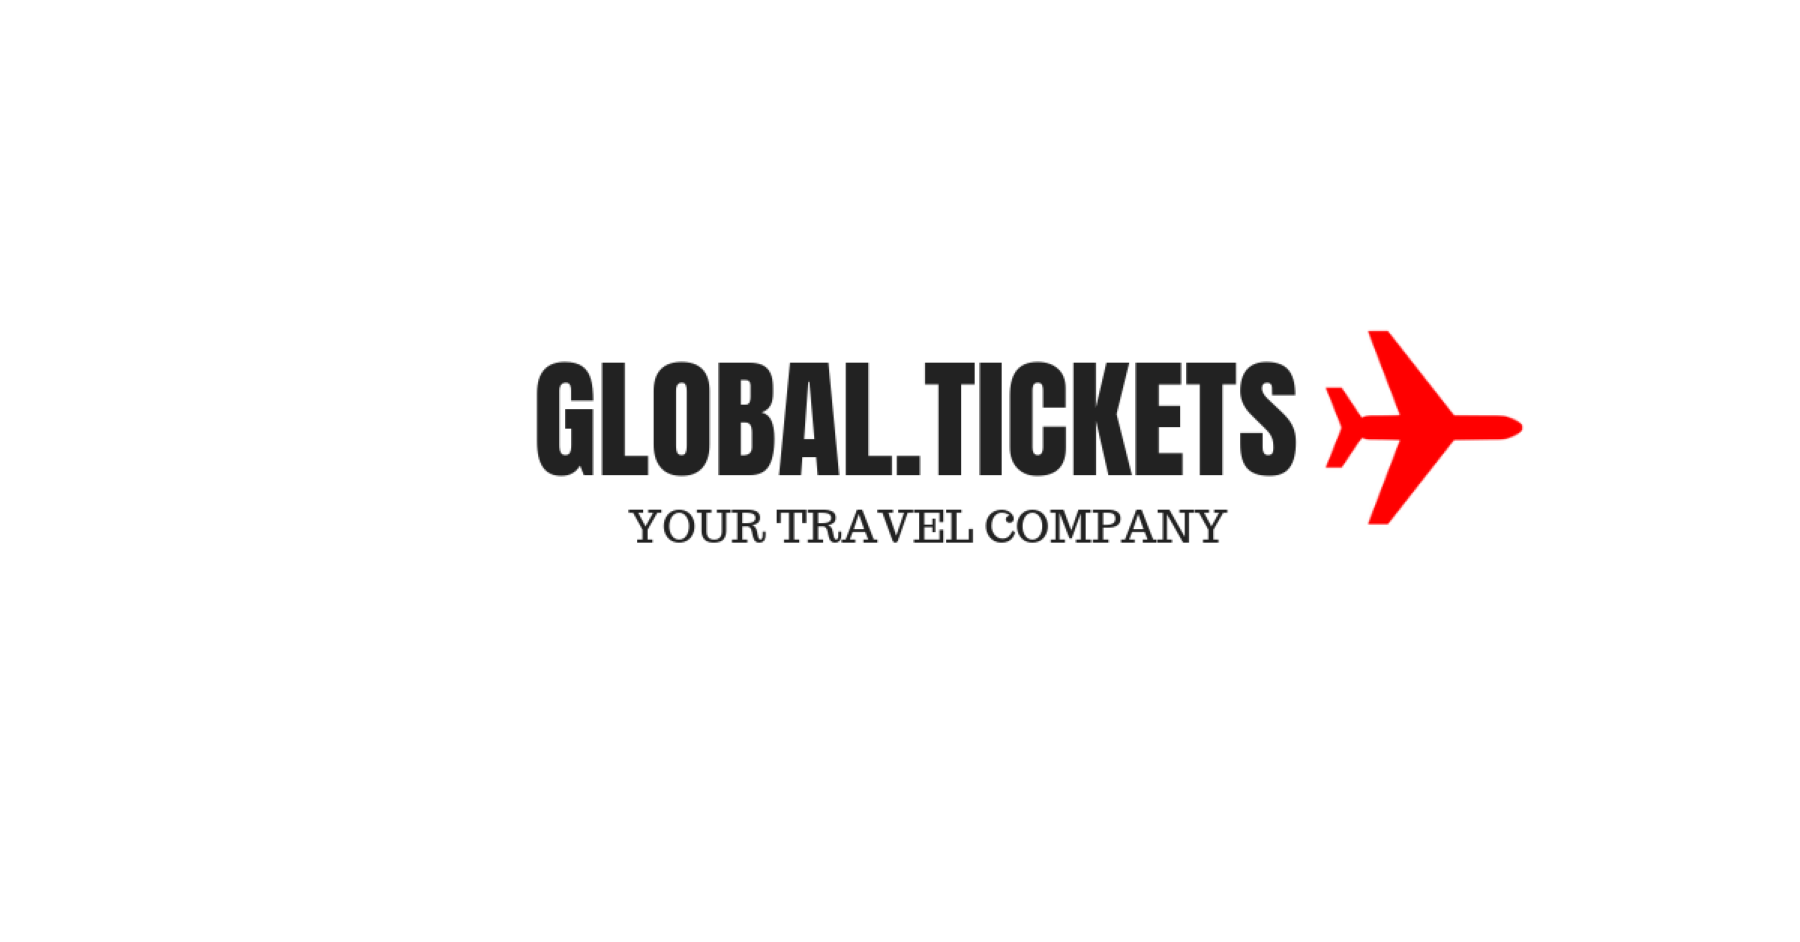 GLOBAL TICKETS